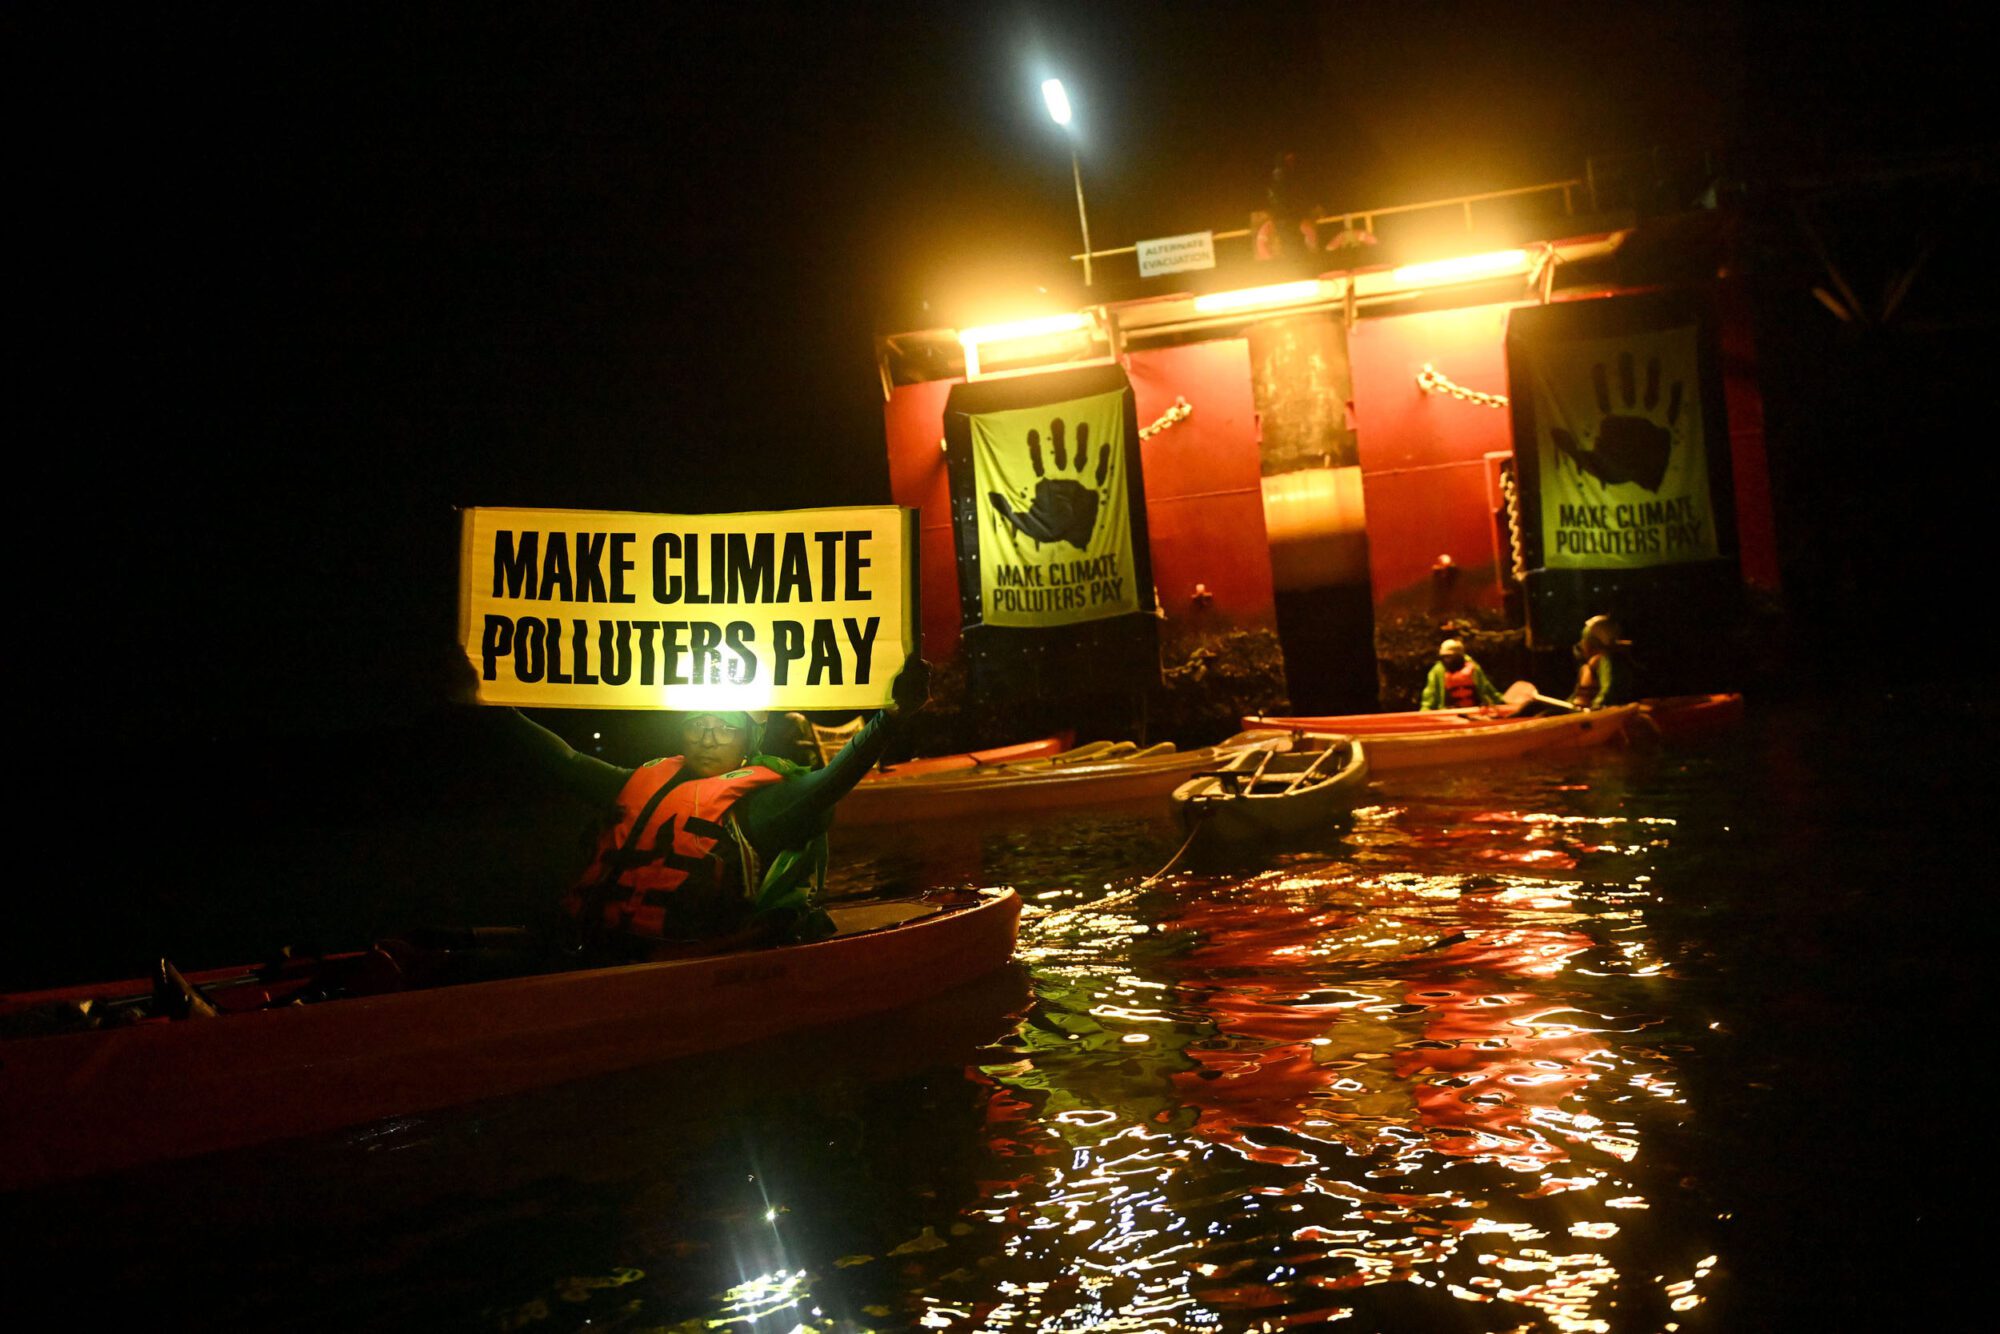 A night-time scene on water lit by a red vessel's bright yellow lighting. On the water are around six kayaks and an activist holding a yellow banner uplit to read the words "Make climate polluters pay". On the red structure under the lights are hung posters in yellow, both with black handprints and "make climate polluters pay" text underneath.